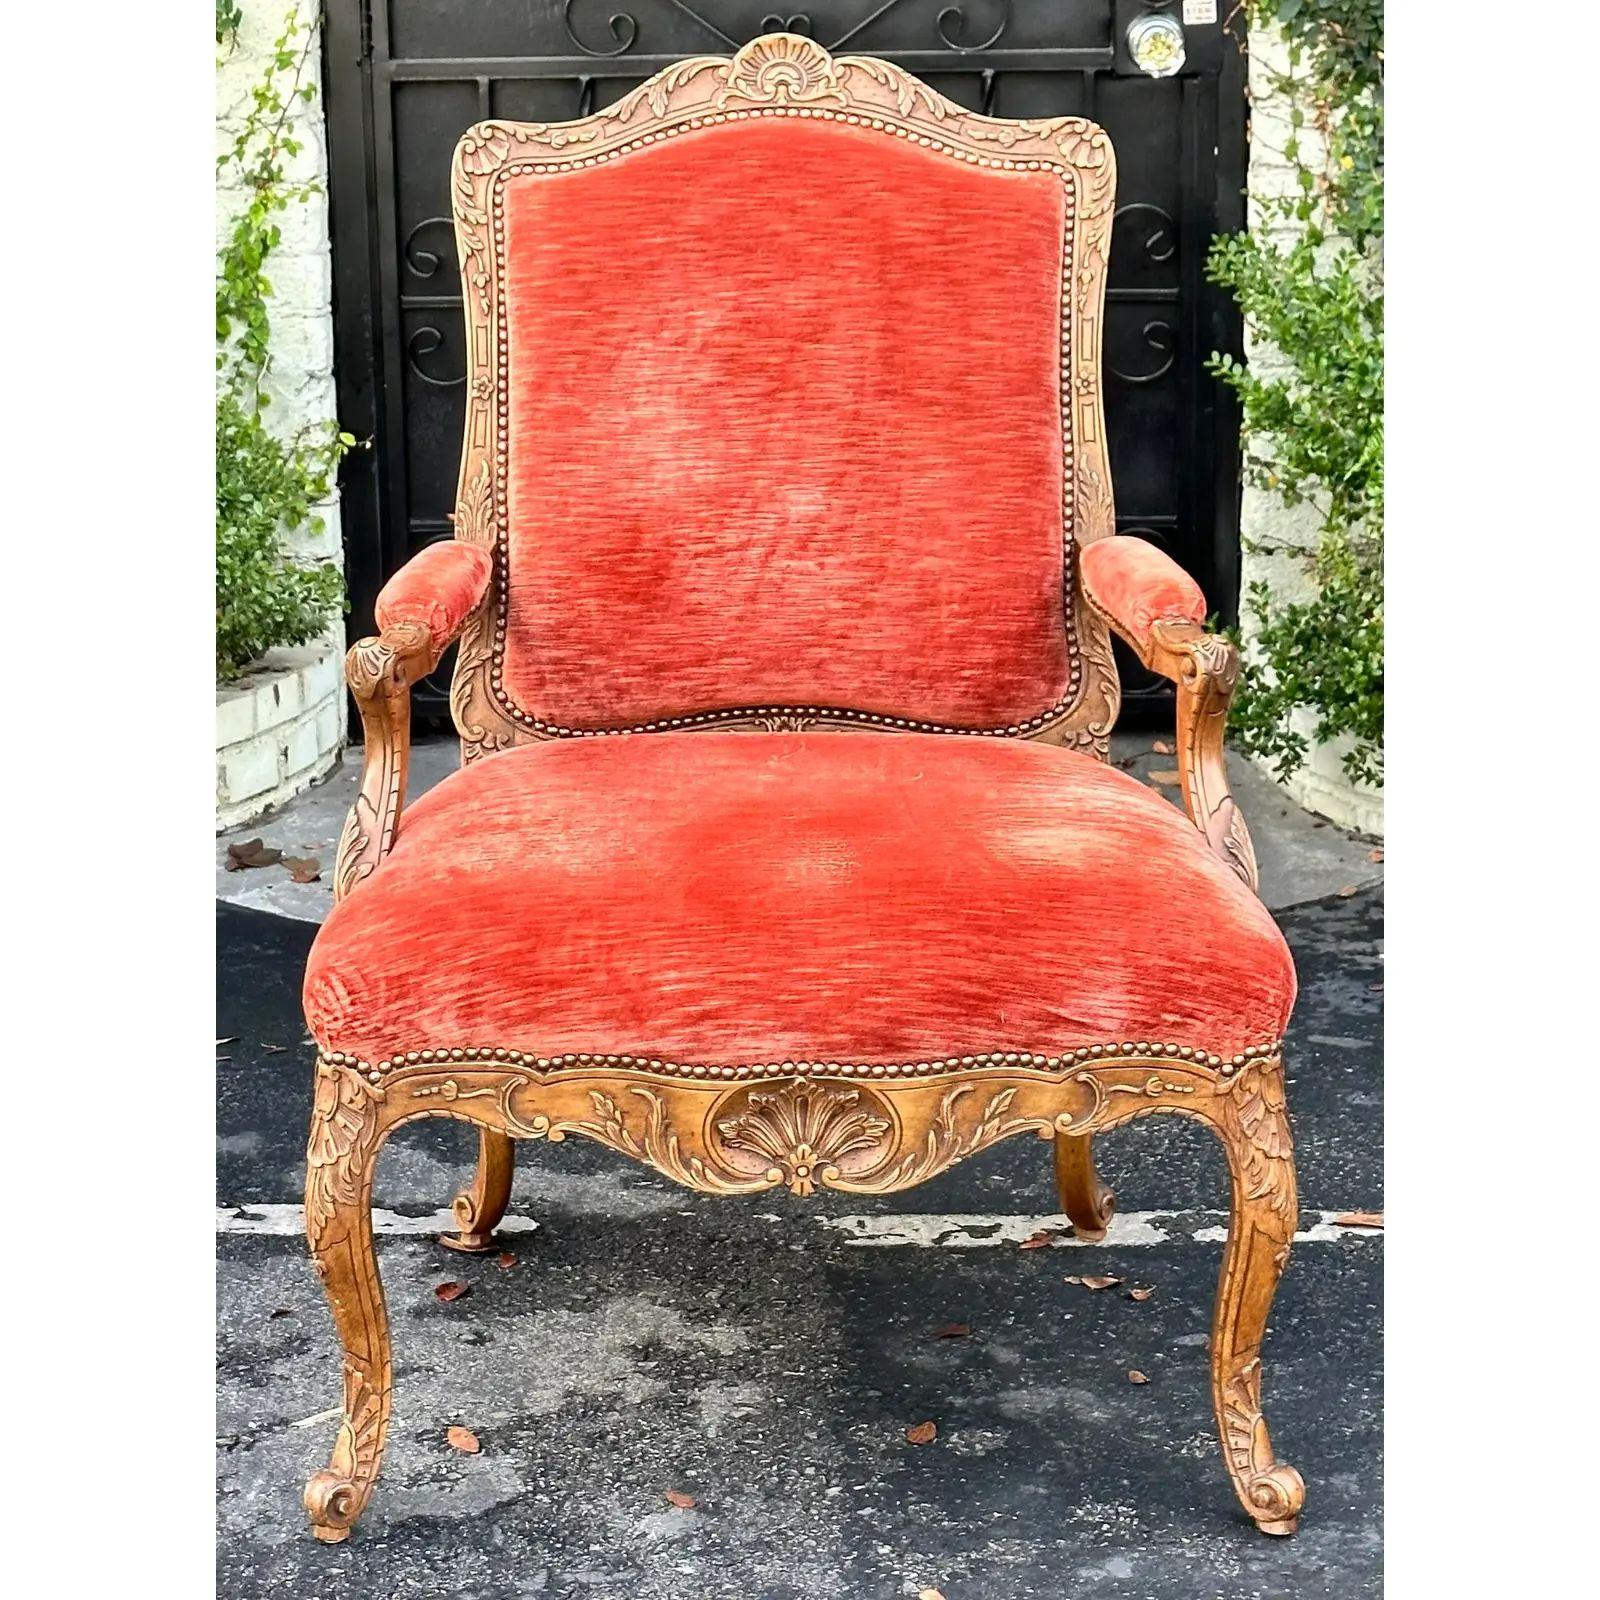 18th Century style ebanista carved italian fauteuil arm chair. It featured expensive aged velvet upholstery on a carved walnut frame.

Additional information: 
Materials: Walnut,Velvet
Color: Red
Period: 1990s
Number of Seats: 1
Styles: